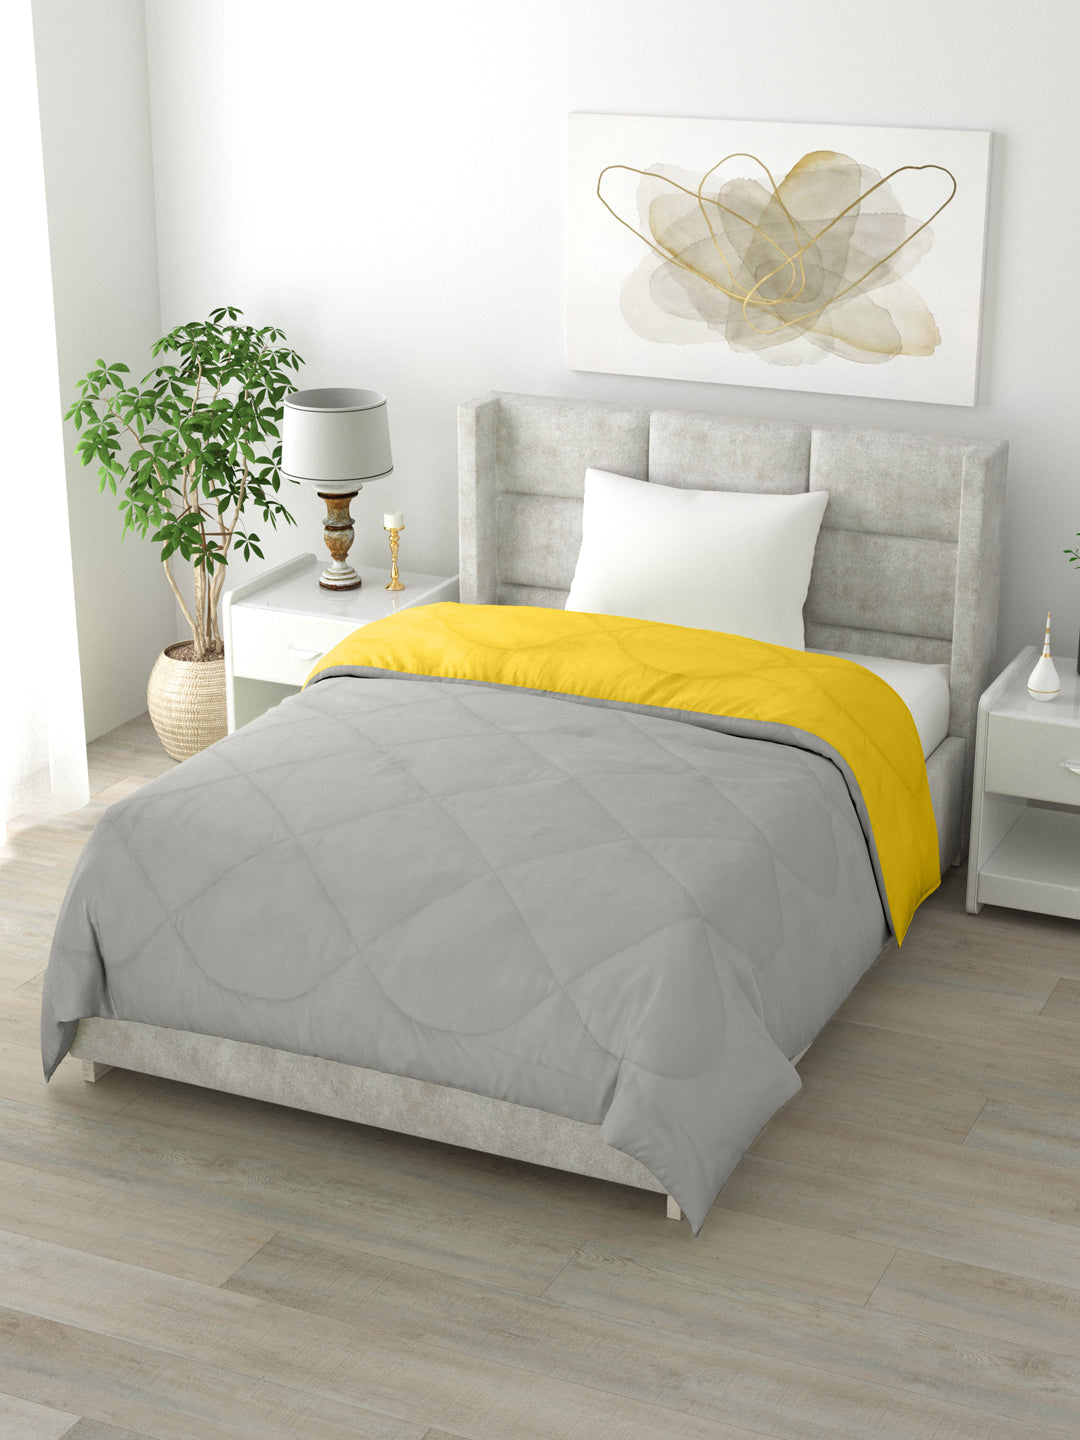 Reversible Single Bed Comforter 200 GSM 60x90 Inches (Grey & Yellow)